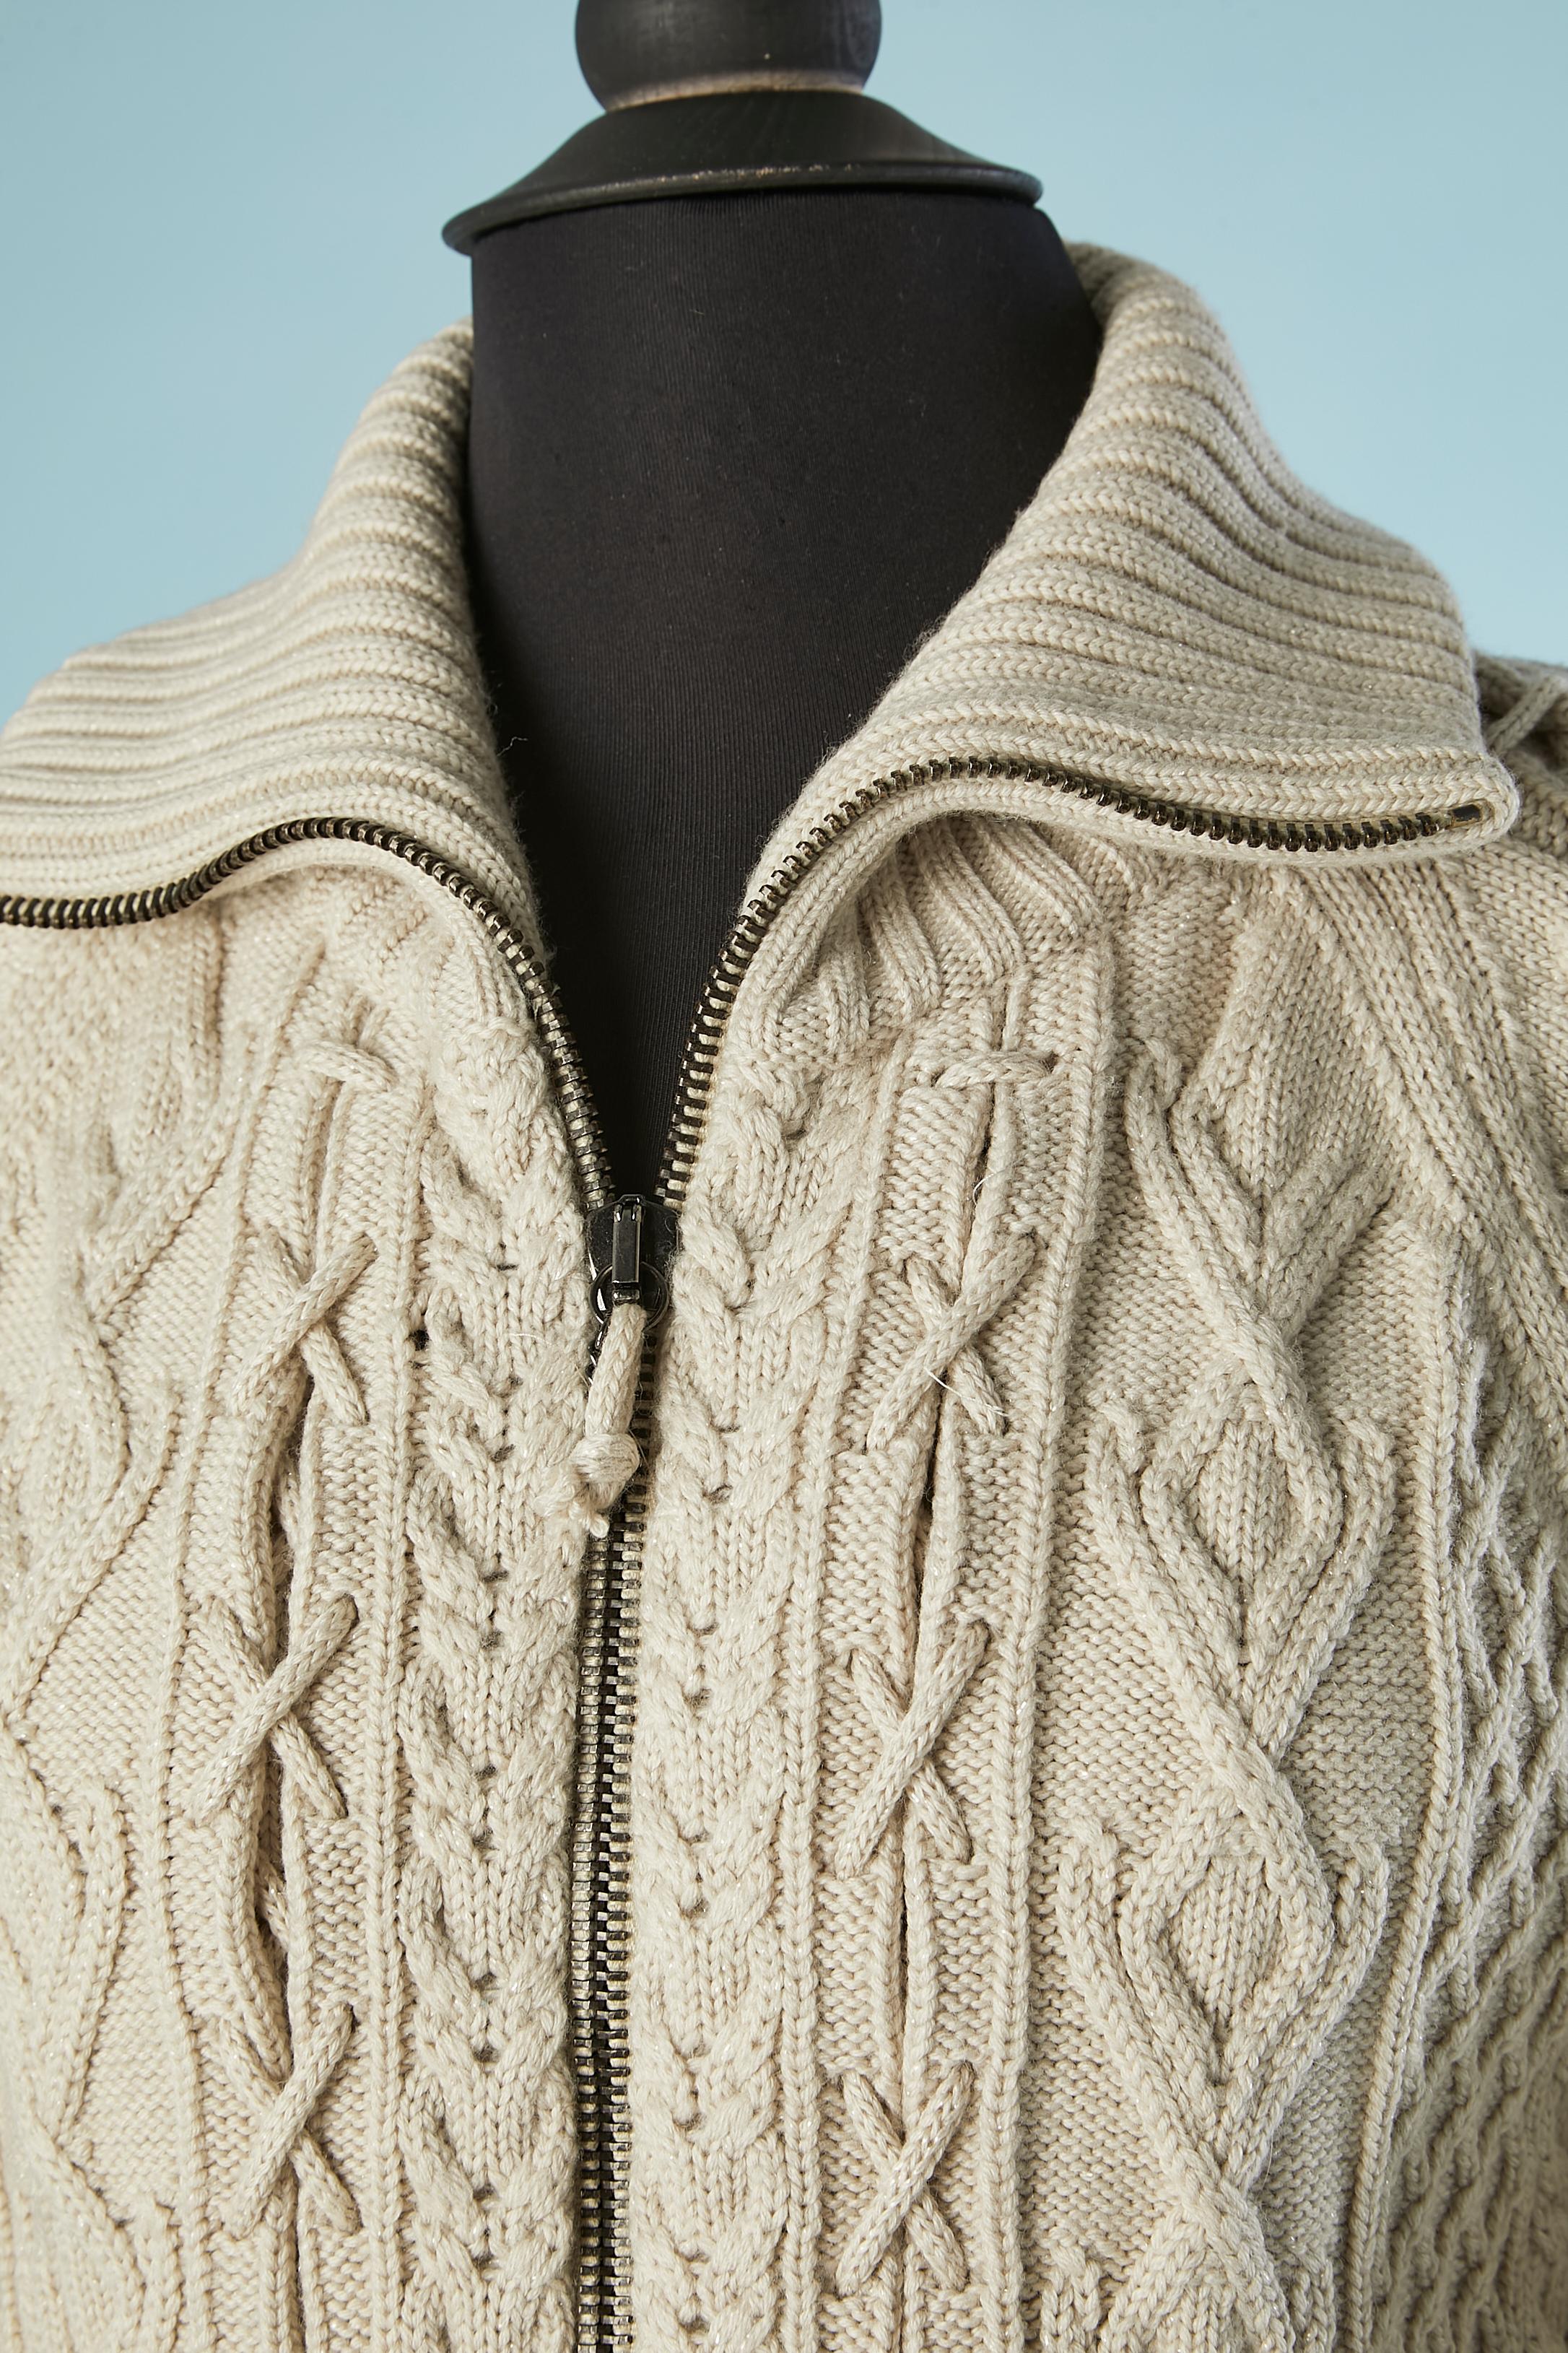 Beige wool knit cardigan with zip.
Knit composition: 96% wool, 3% polyester, 2% nylon. 
SIZE L 